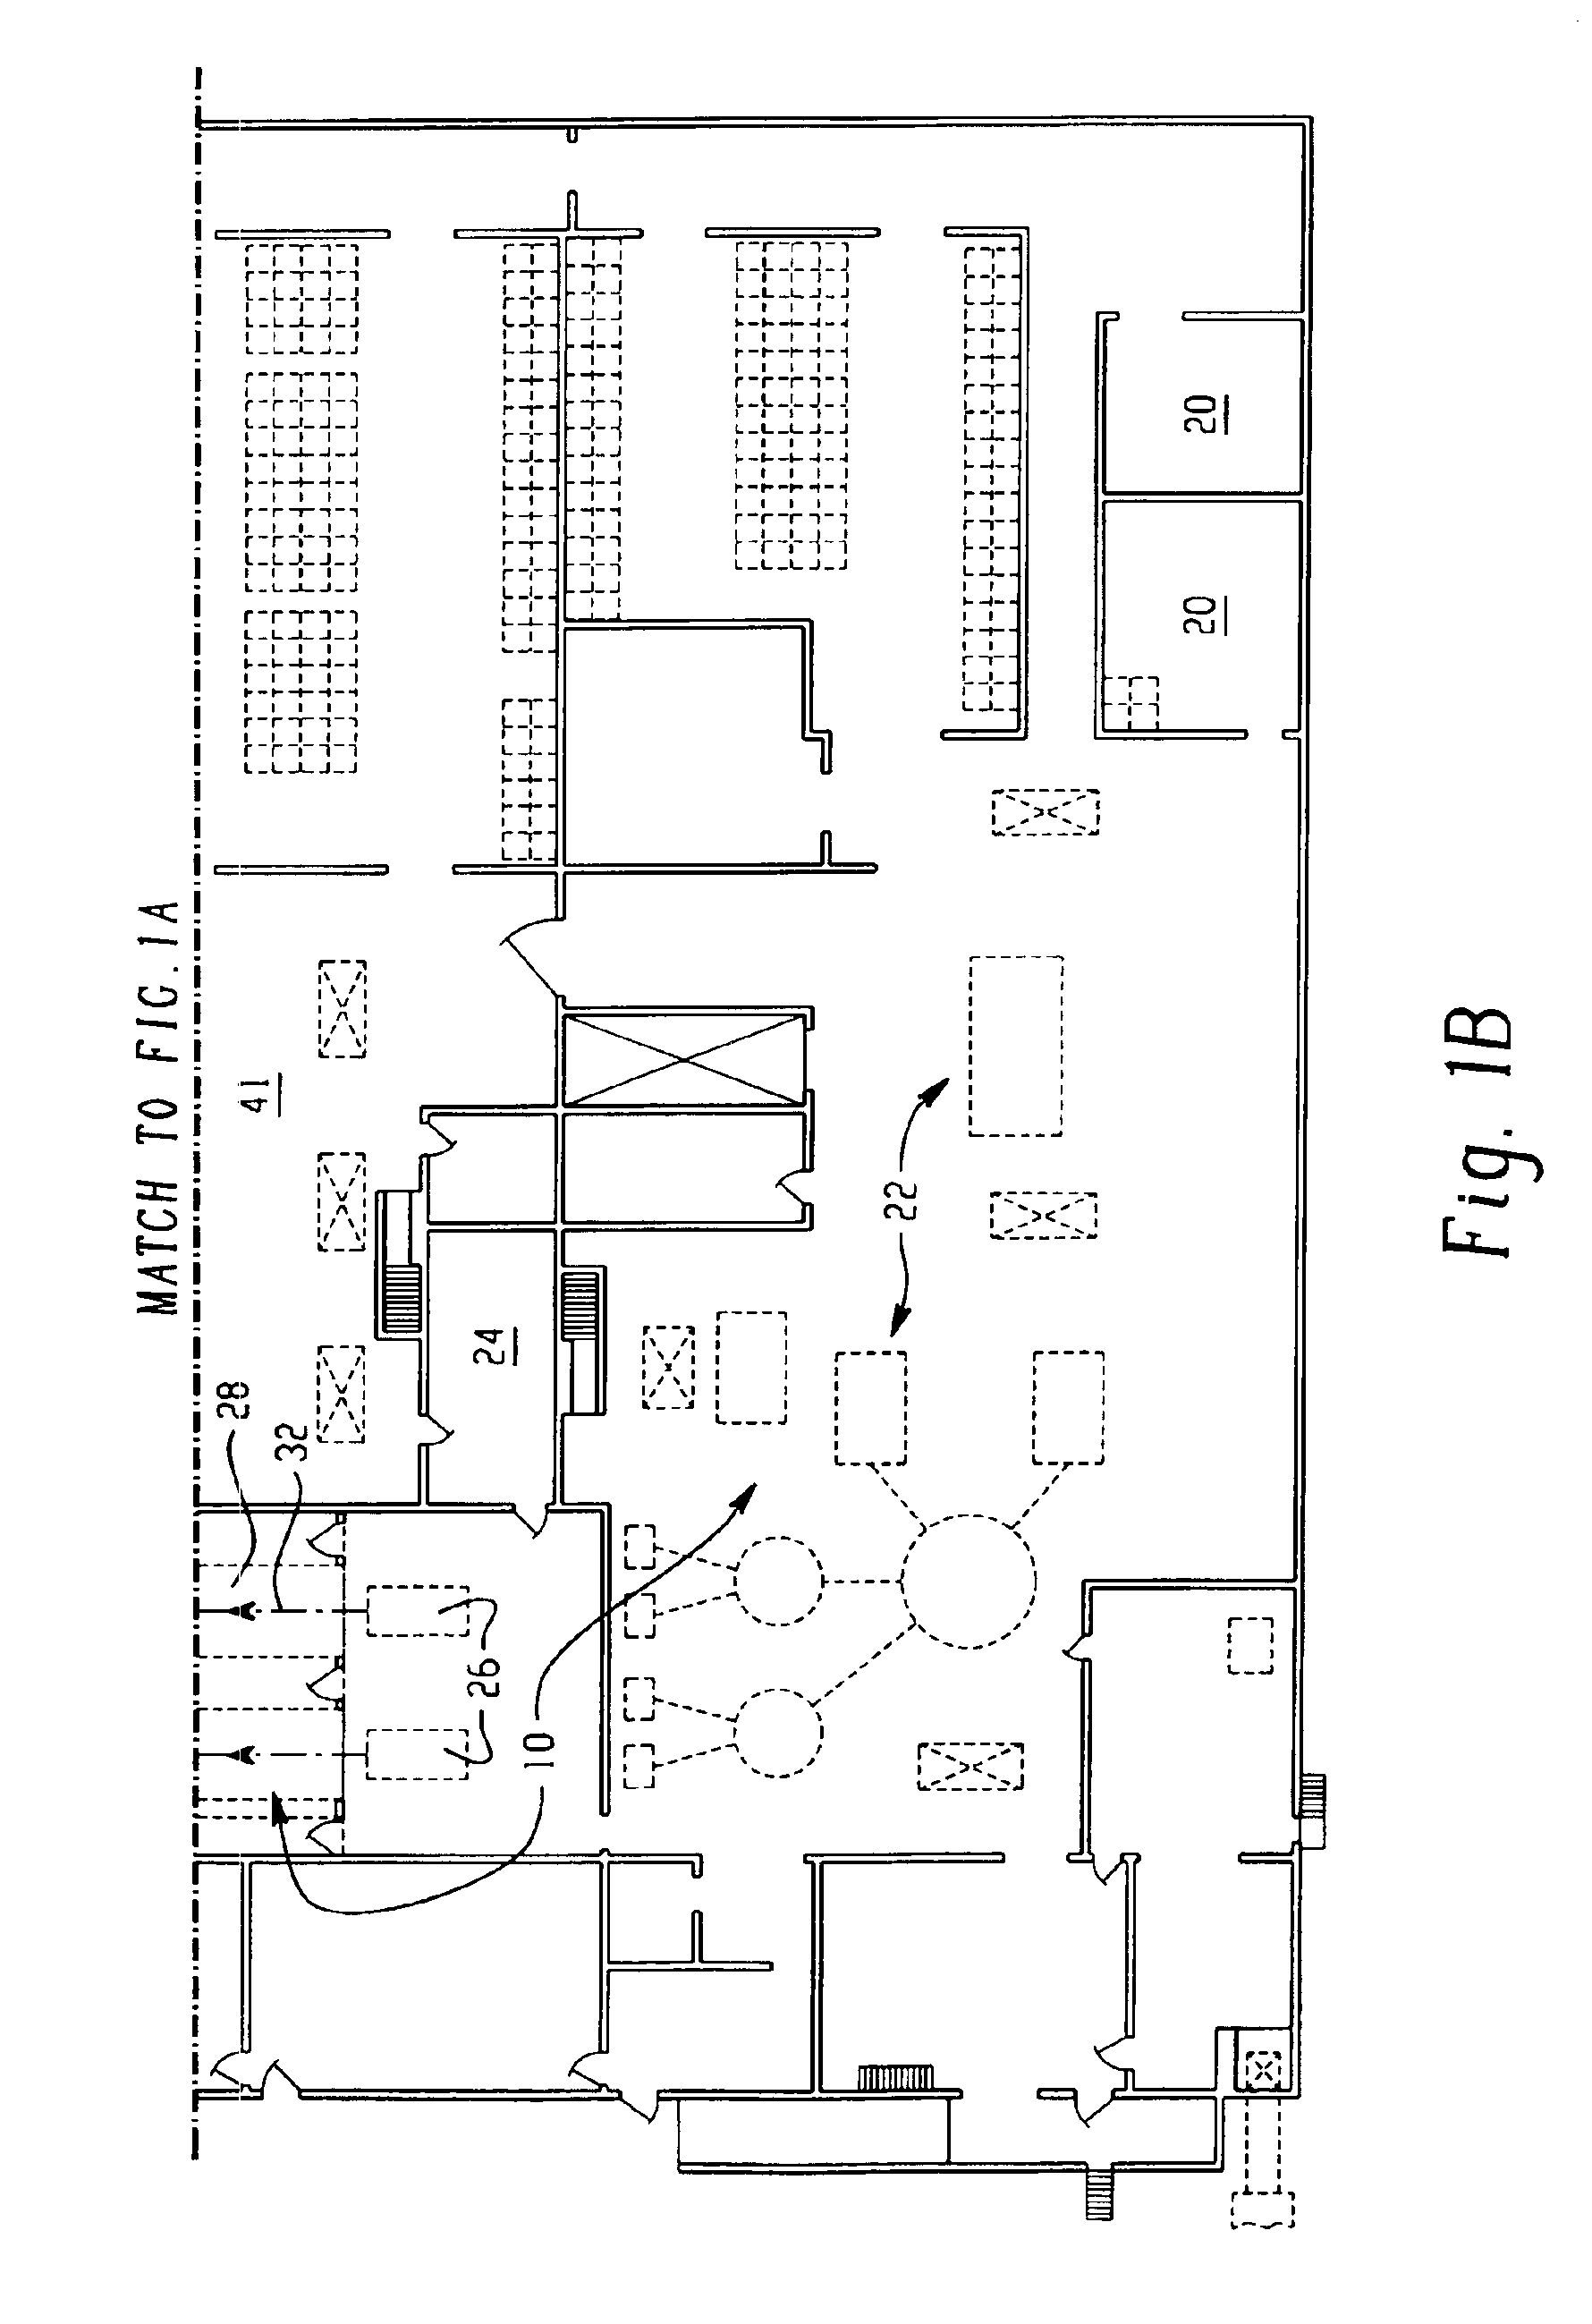 System for handling processed meat and poultry products